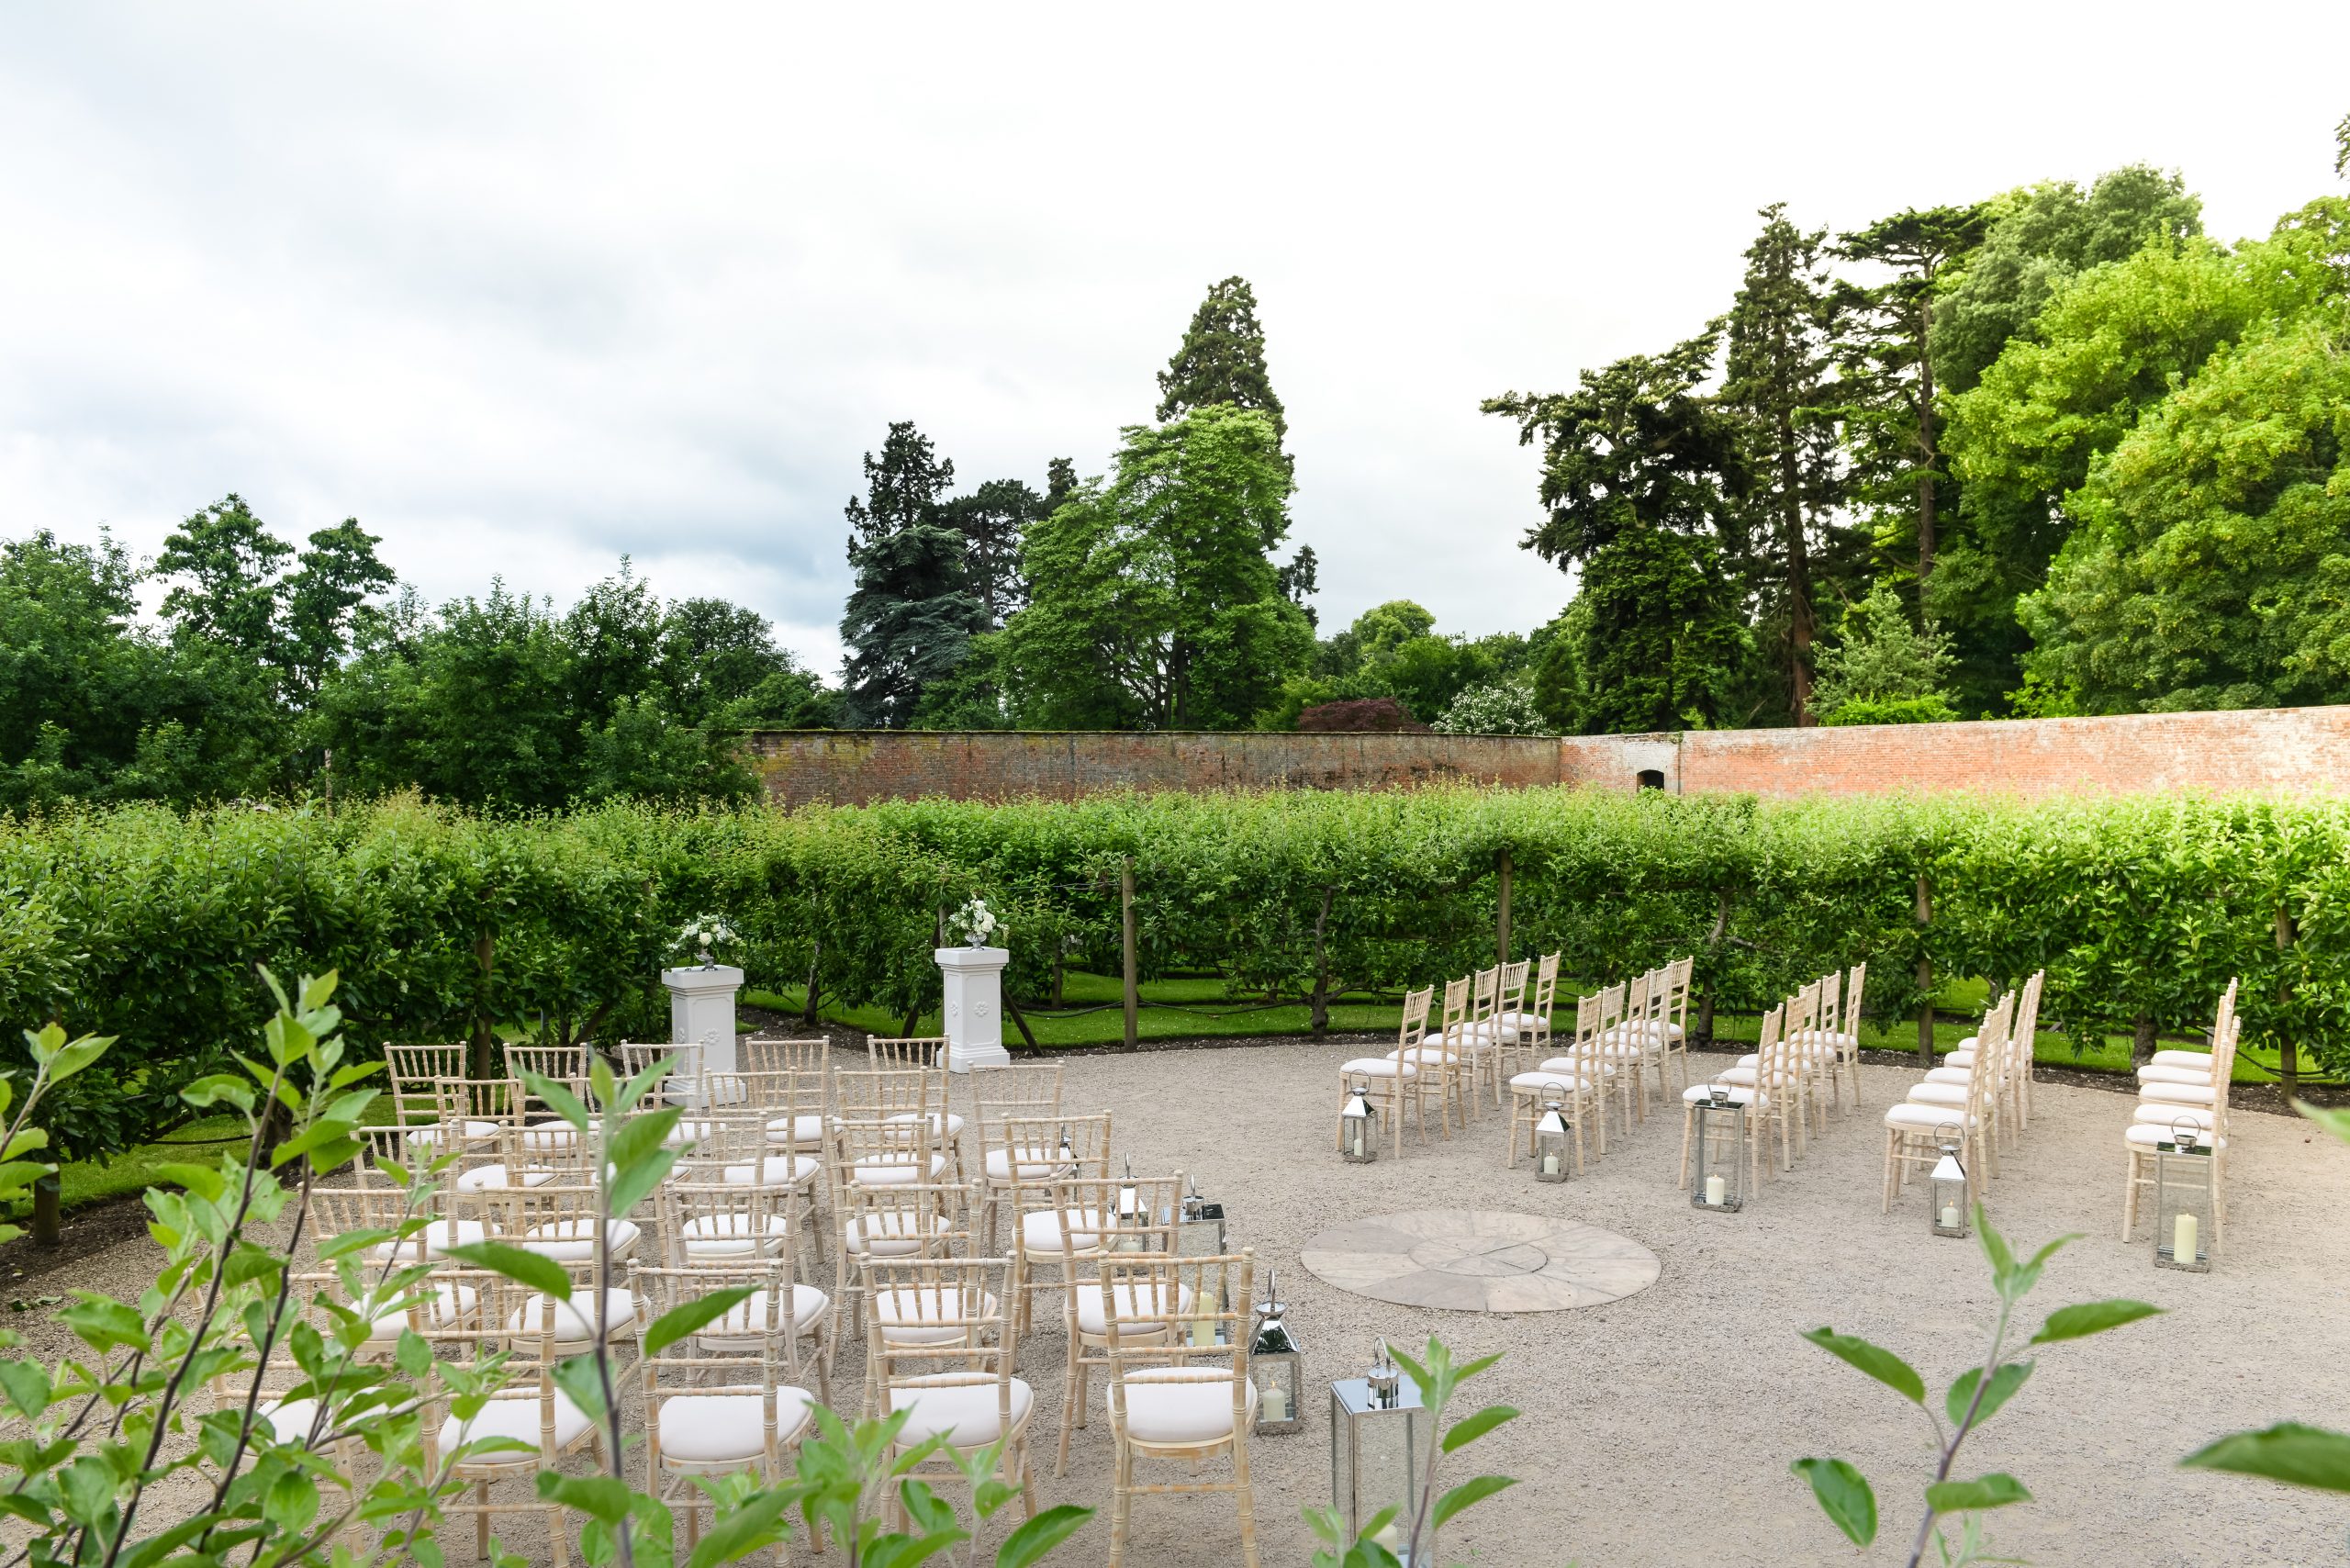 Outdoor weddings at Combermere Abbey in the fruit tree maze